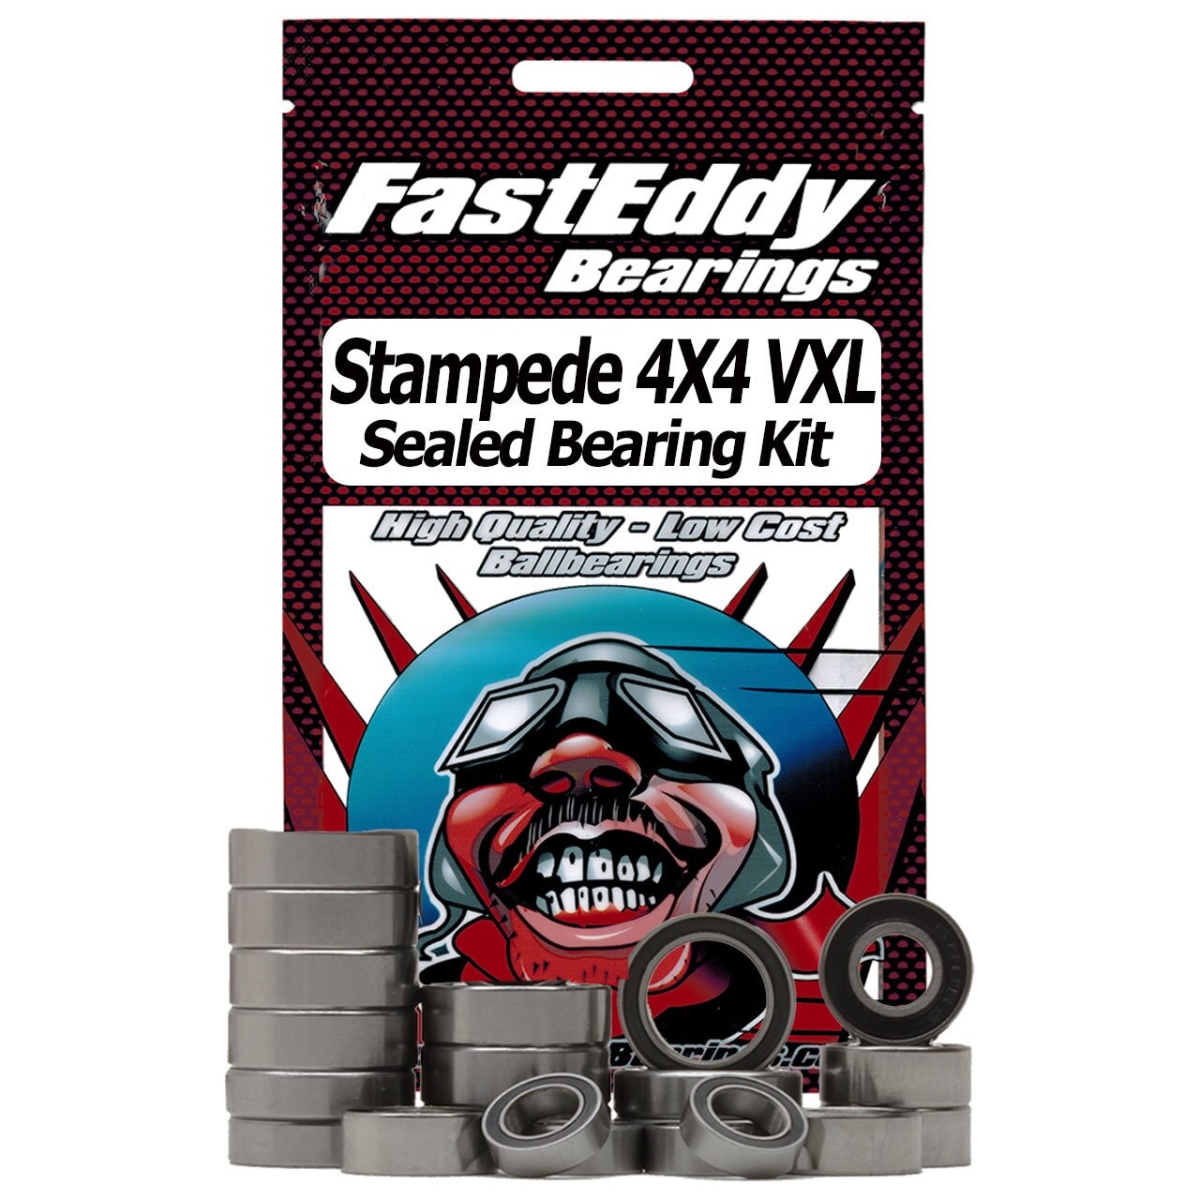 TFE312 Traxxas Stampede 4 x 4 VXL Sealed Bearing Kit -  FastEddy